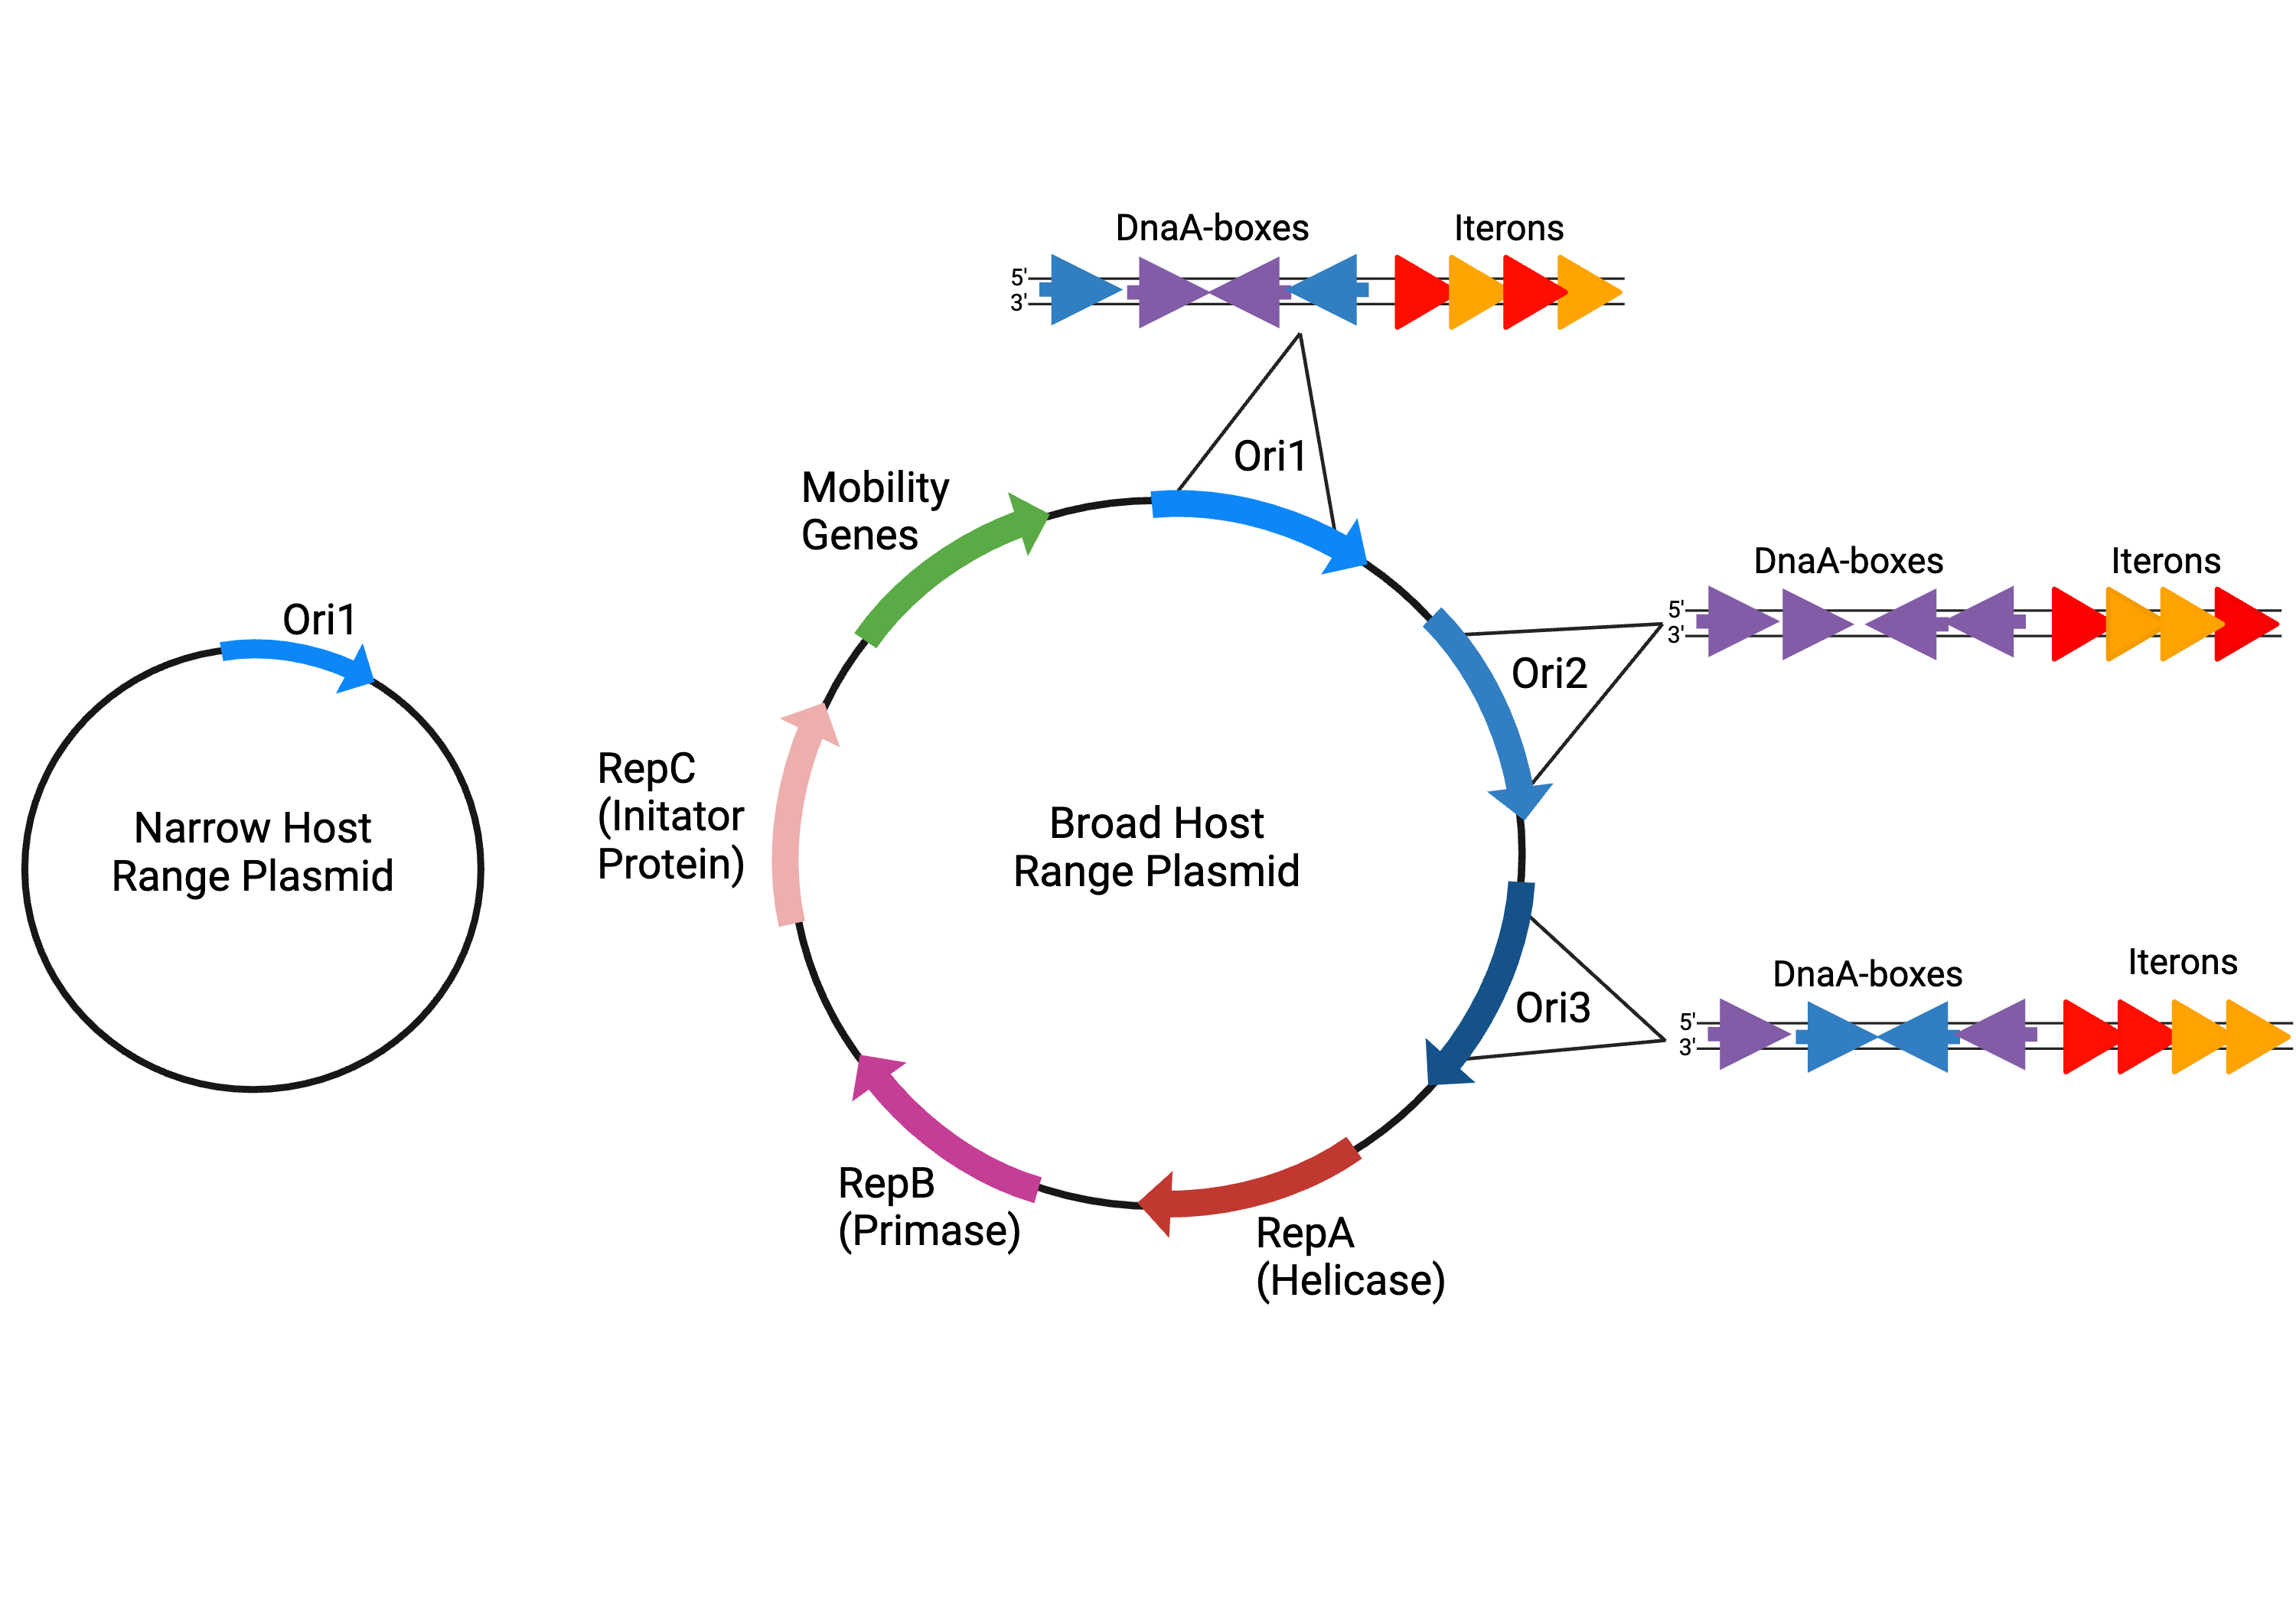 Left: small plasmid with one ORI, "ORI1", labelled "narrow host range plasmid". Right, plasmid with ORI1, ORI2, and ORI3. Each ORI has an insert with different DnaA-boxes and iterons; differences are represented by different colors. 